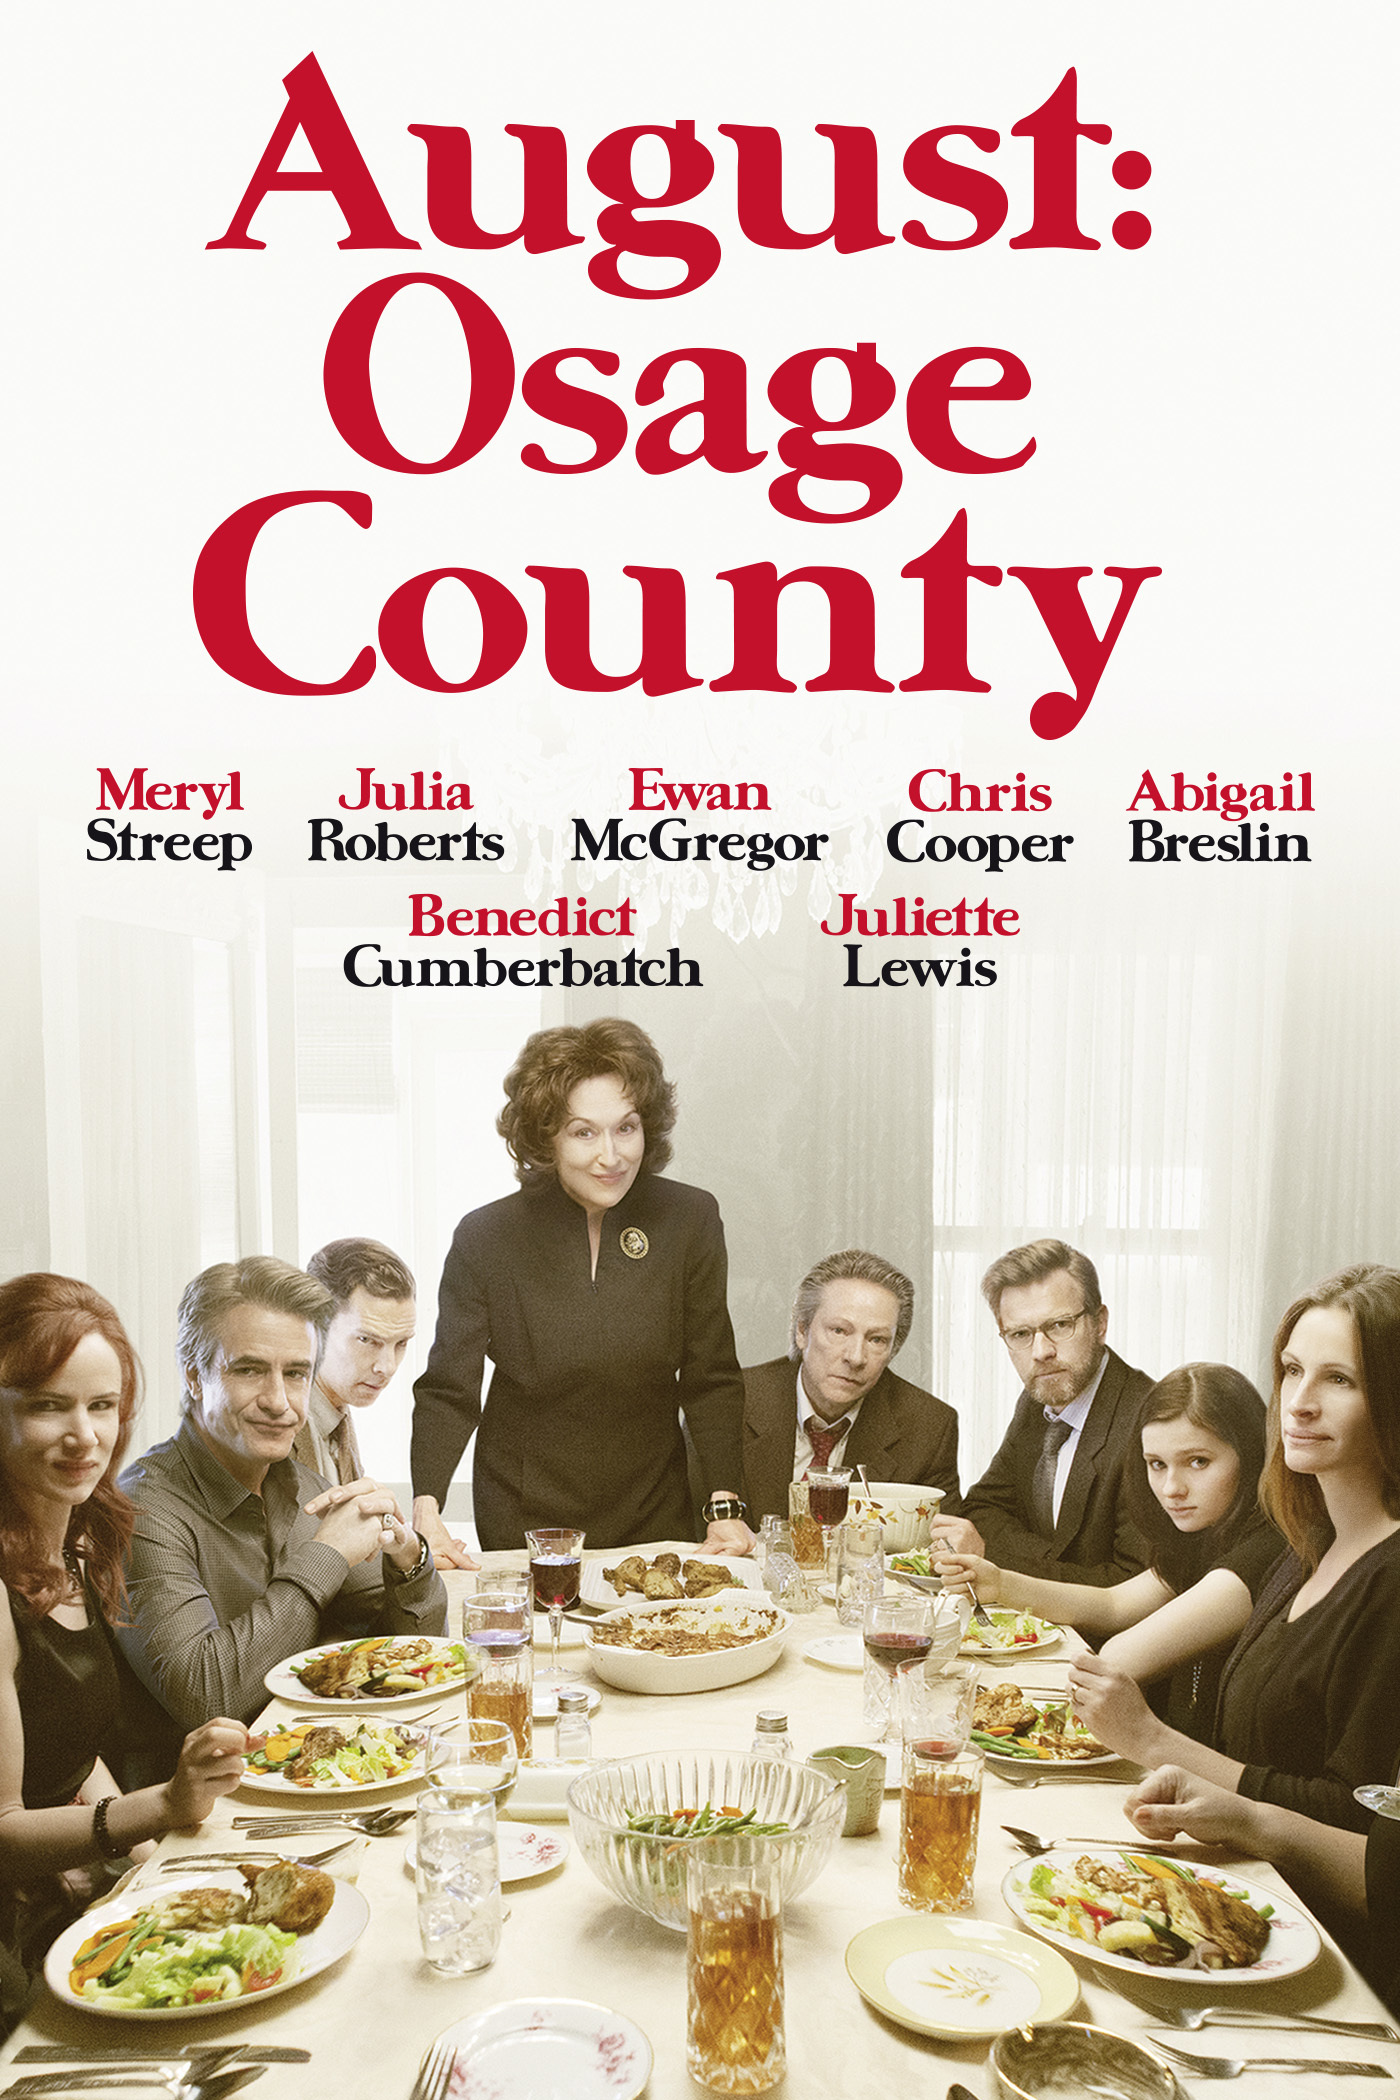 August: Osage County (2013) ★★★★☆